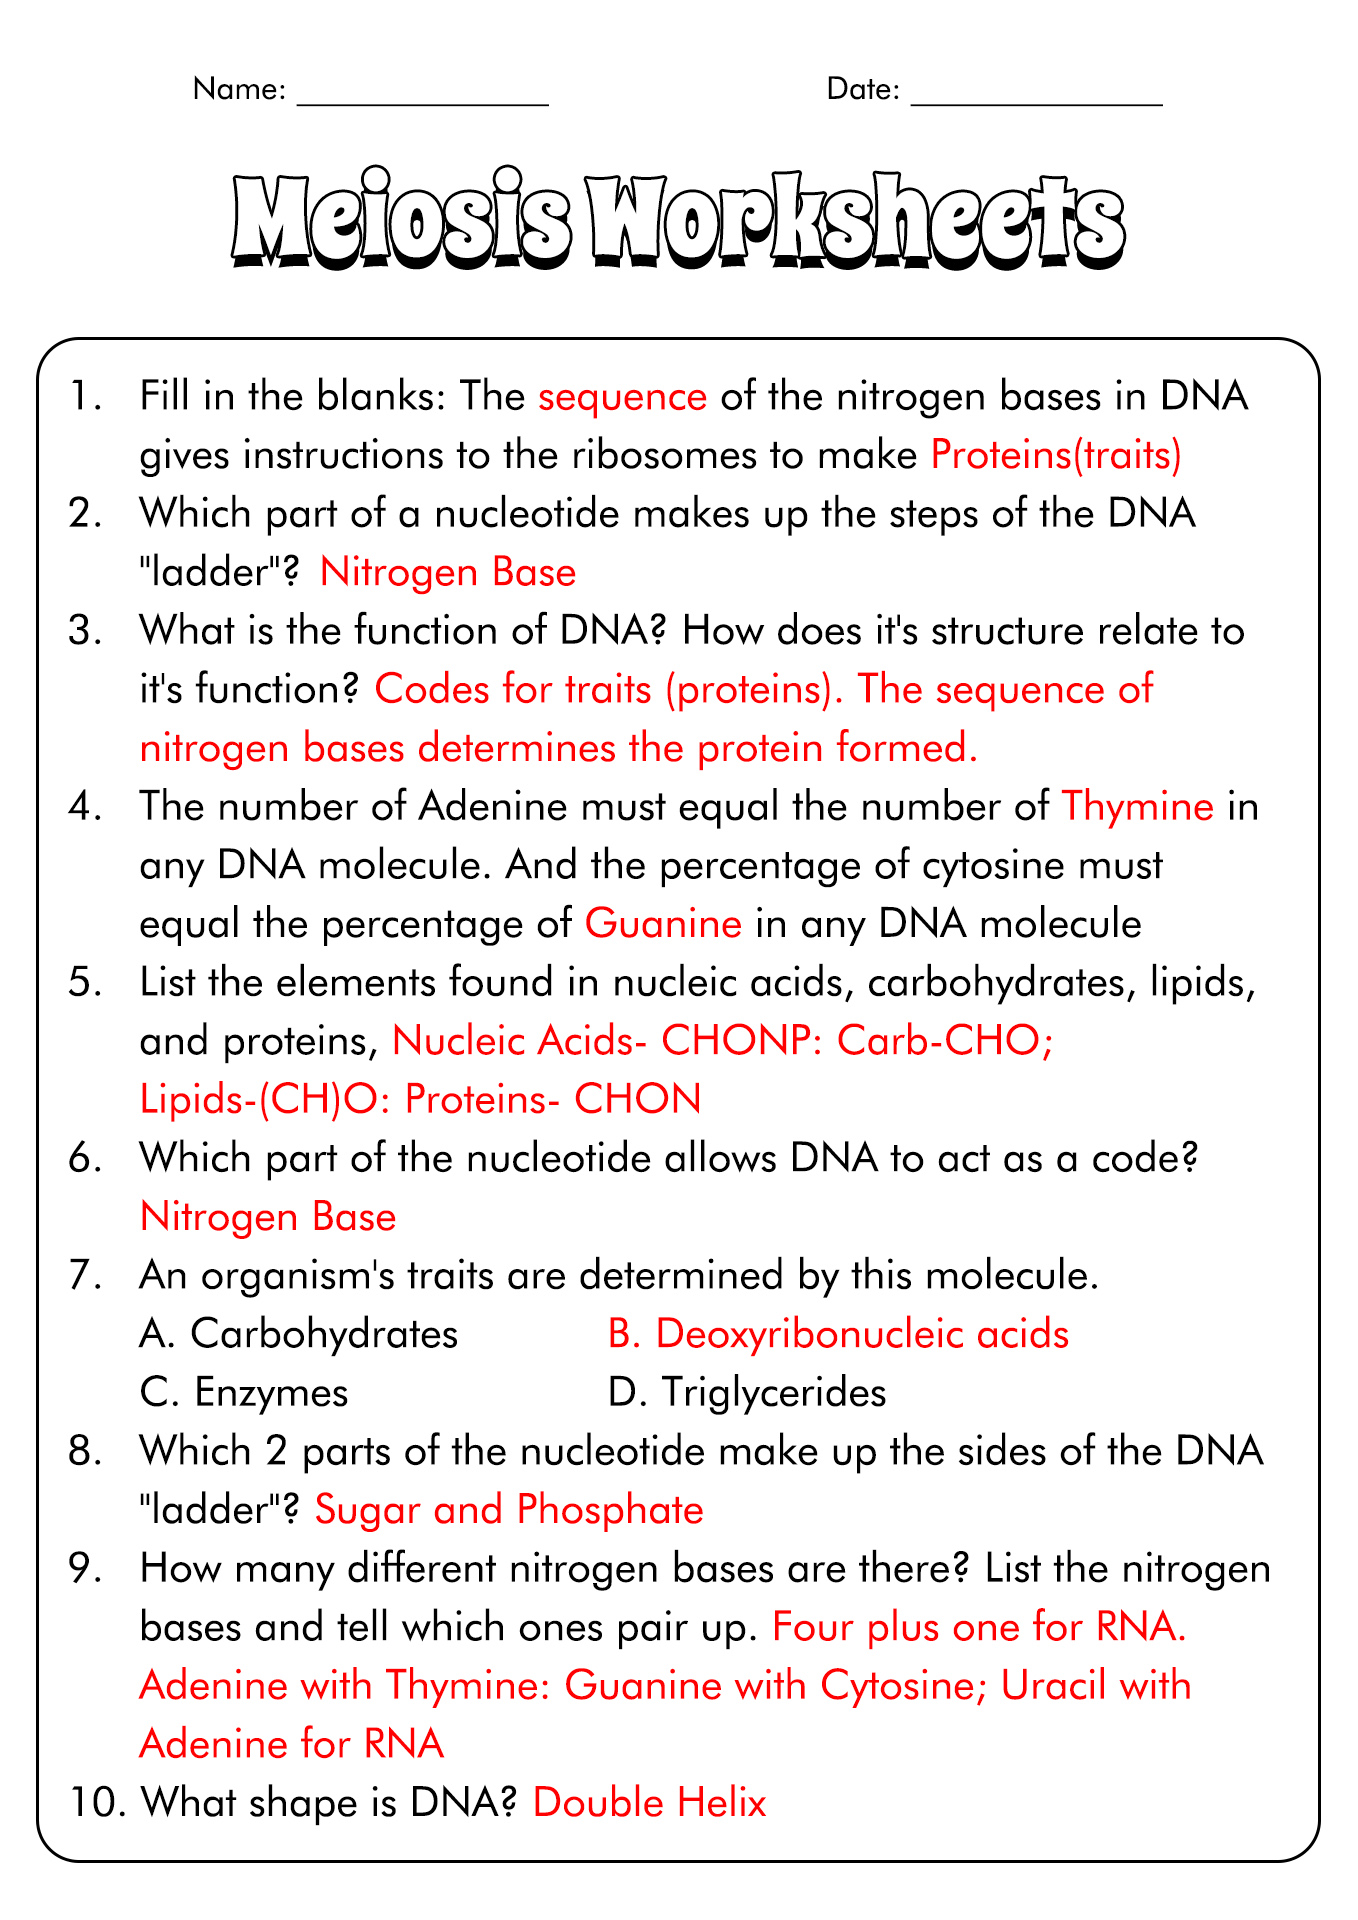 Cell Cycle and Mitosis Worksheet Answers